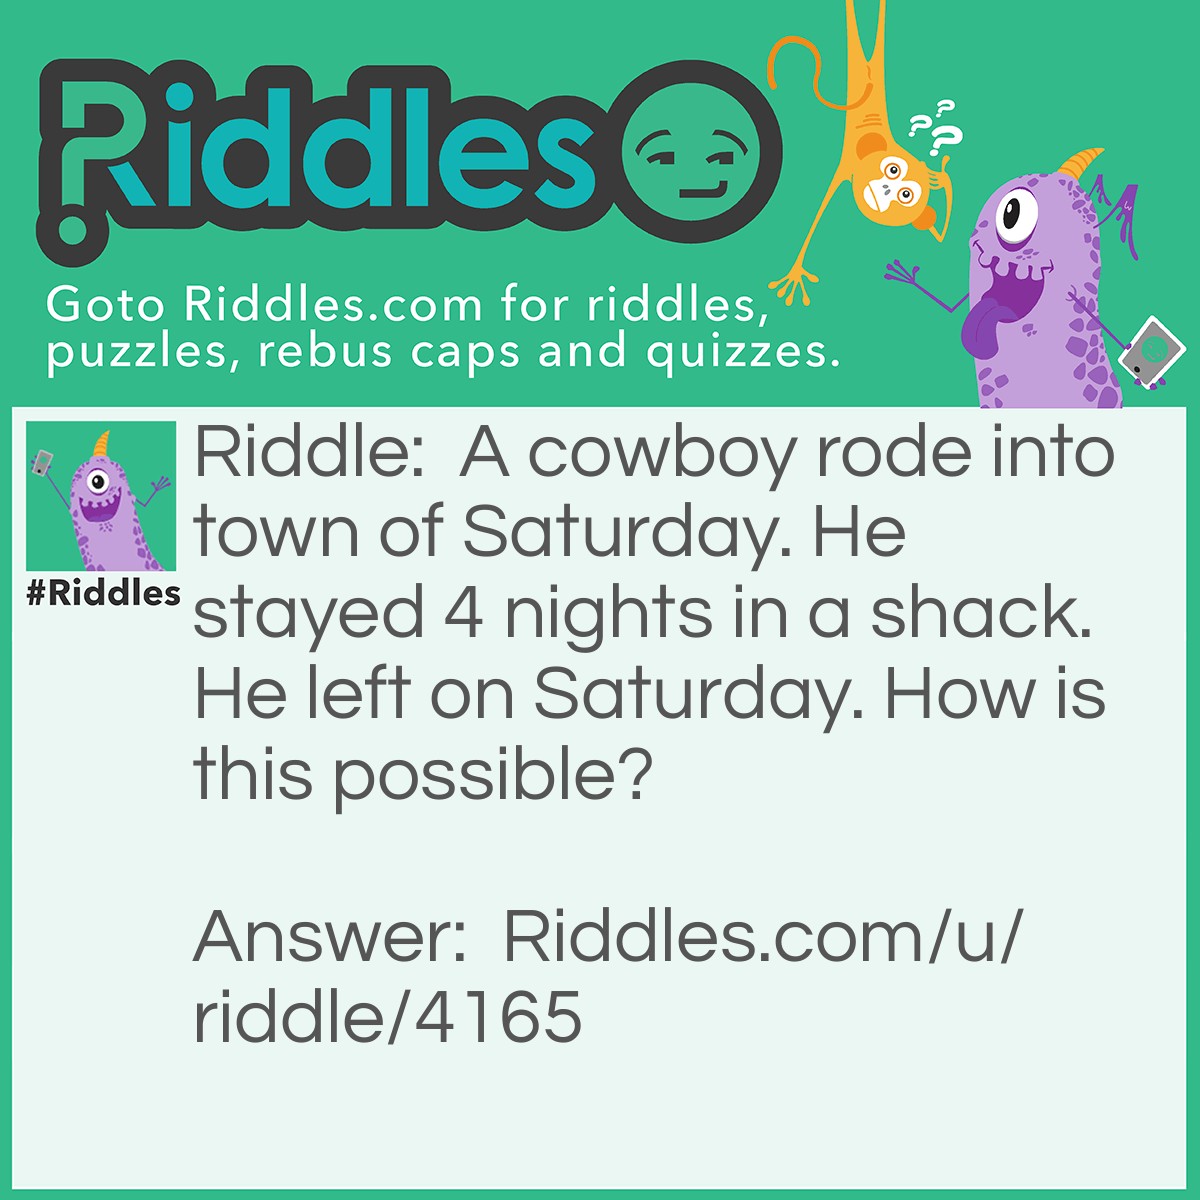 Riddle: A cowboy rode into town of Saturday. He stayed 4 nights in a shack. He left on Saturday. How is this possible? Answer: His horses name was Saturday.